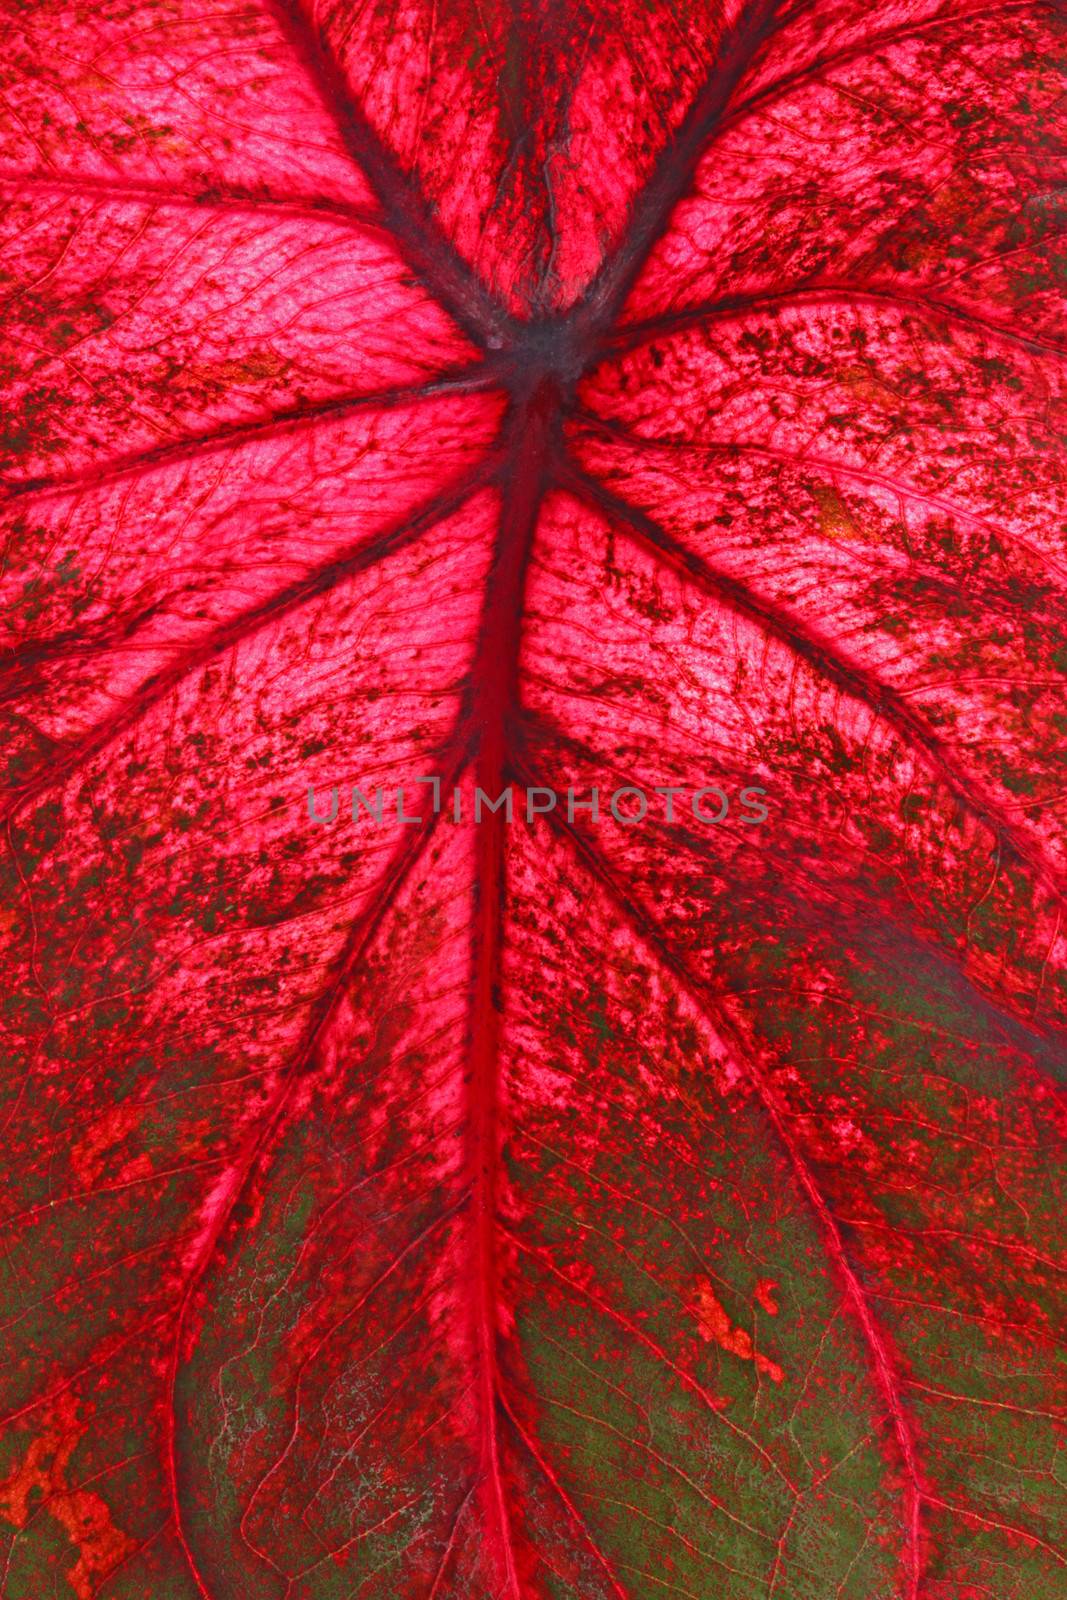 Red and green Caladium leaf fills the vertical frame by sgoodwin4813